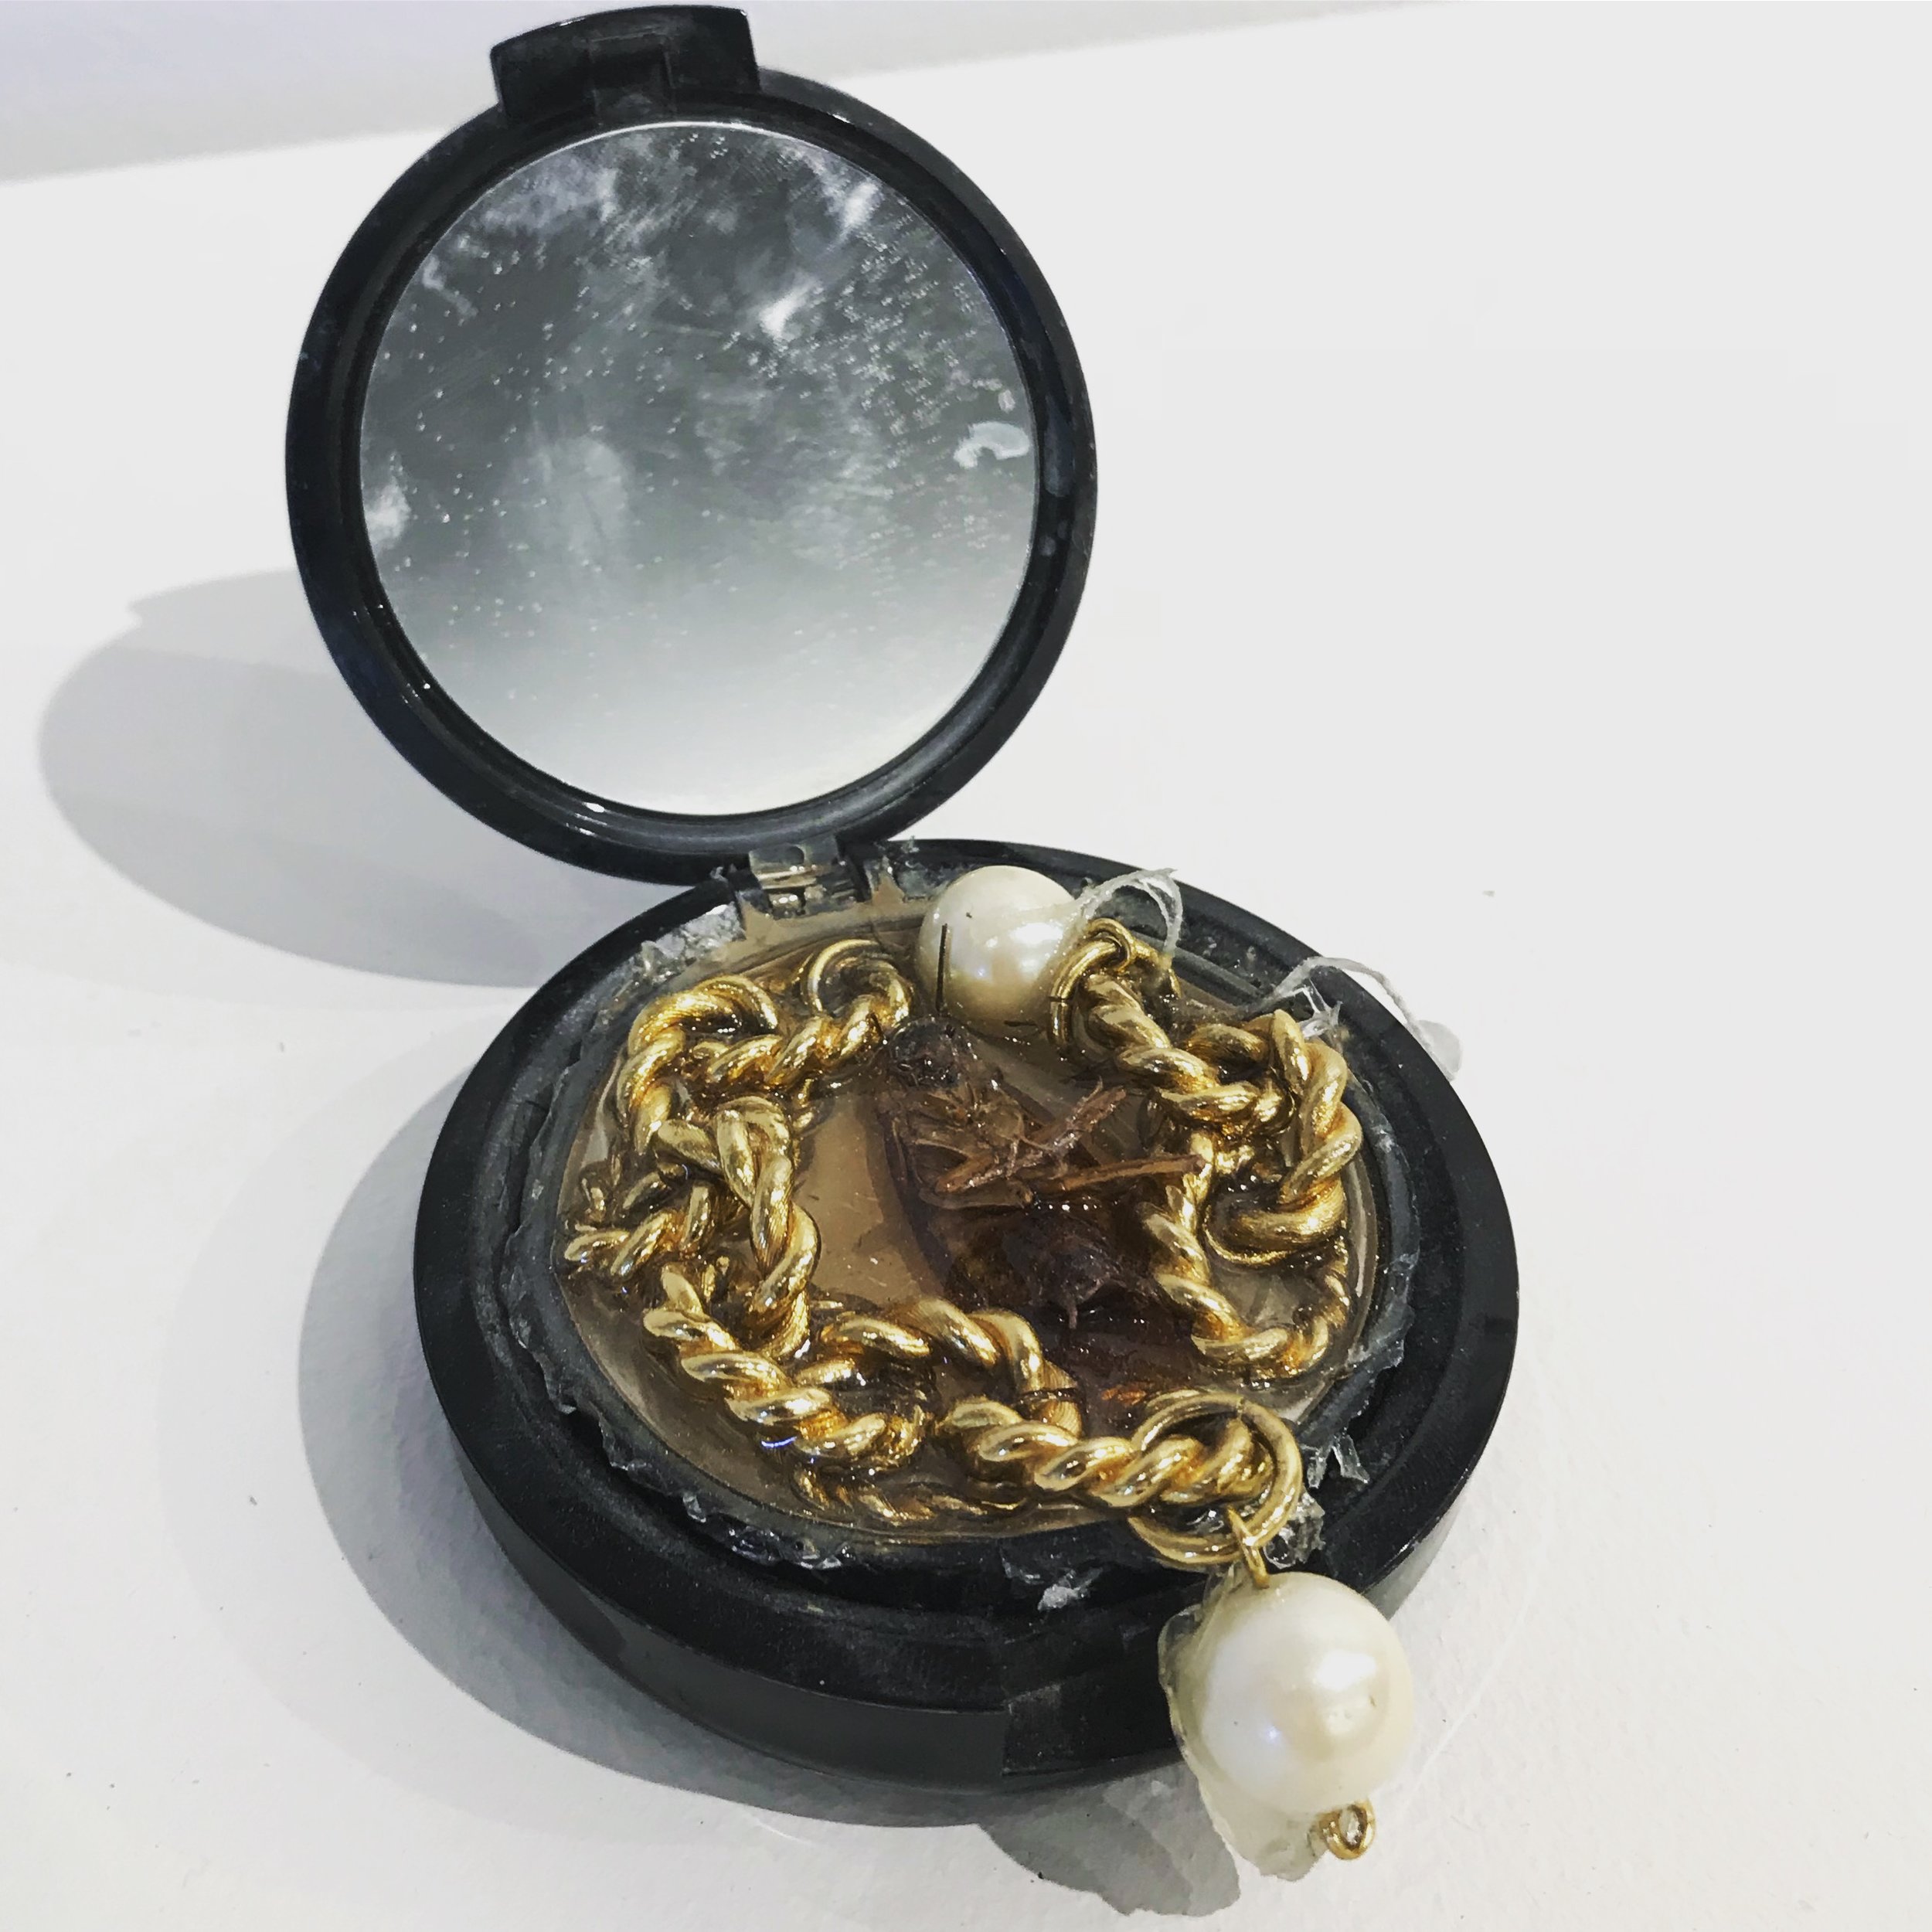   Makeup Compact No. 1,  2018, cockroach, costume jewelry, resin, and used makeup compact, 3x3x3” 